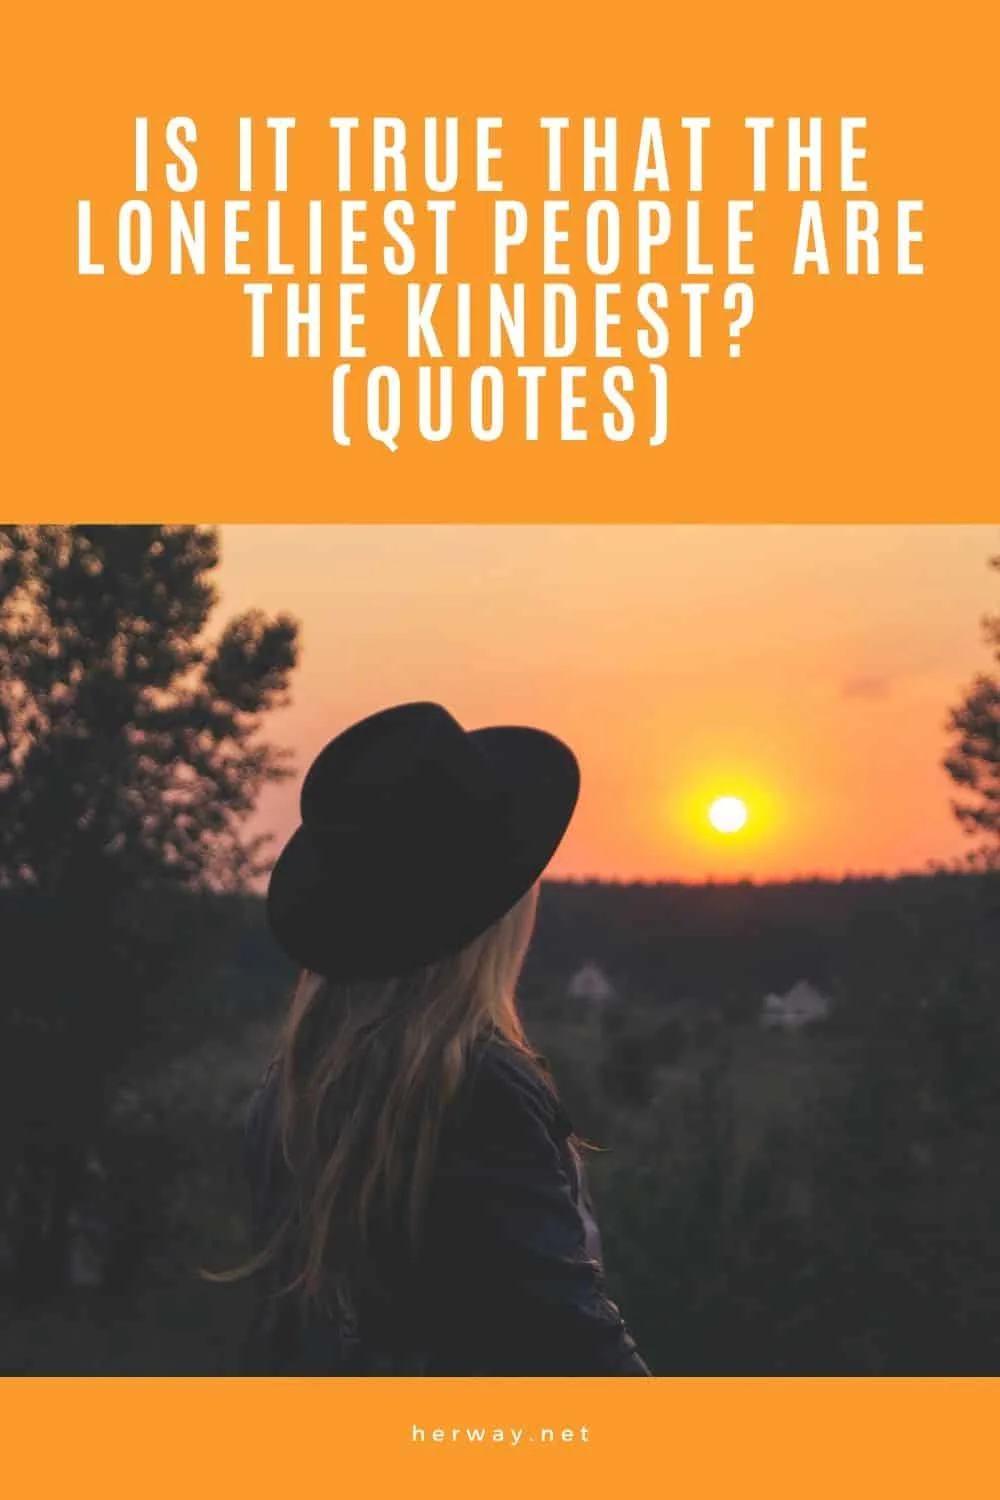 Is It True That The Loneliest People Are The Kindest? (Quotes)